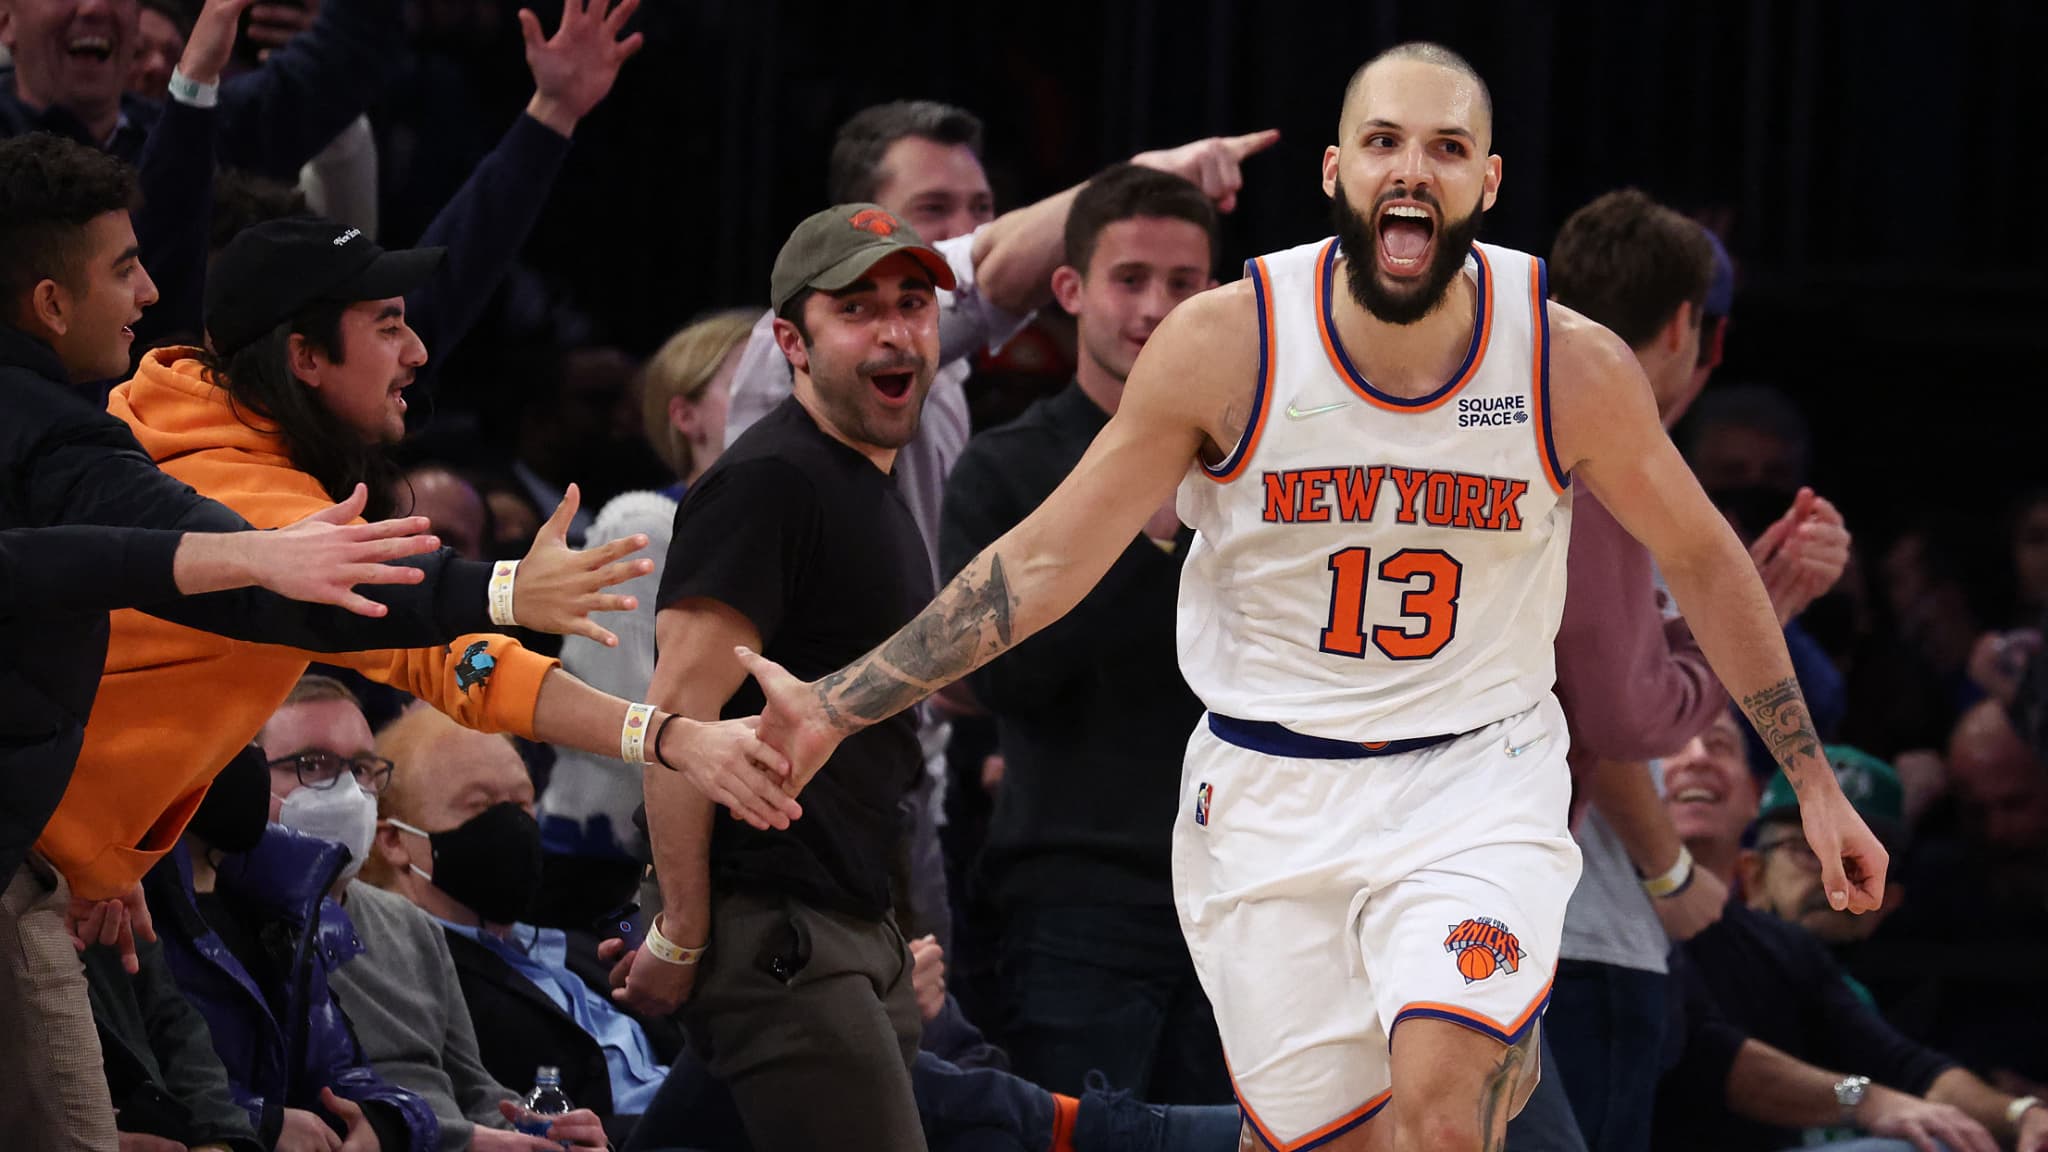 Fournier breaks his points record and sets fire to Madison Square Garden